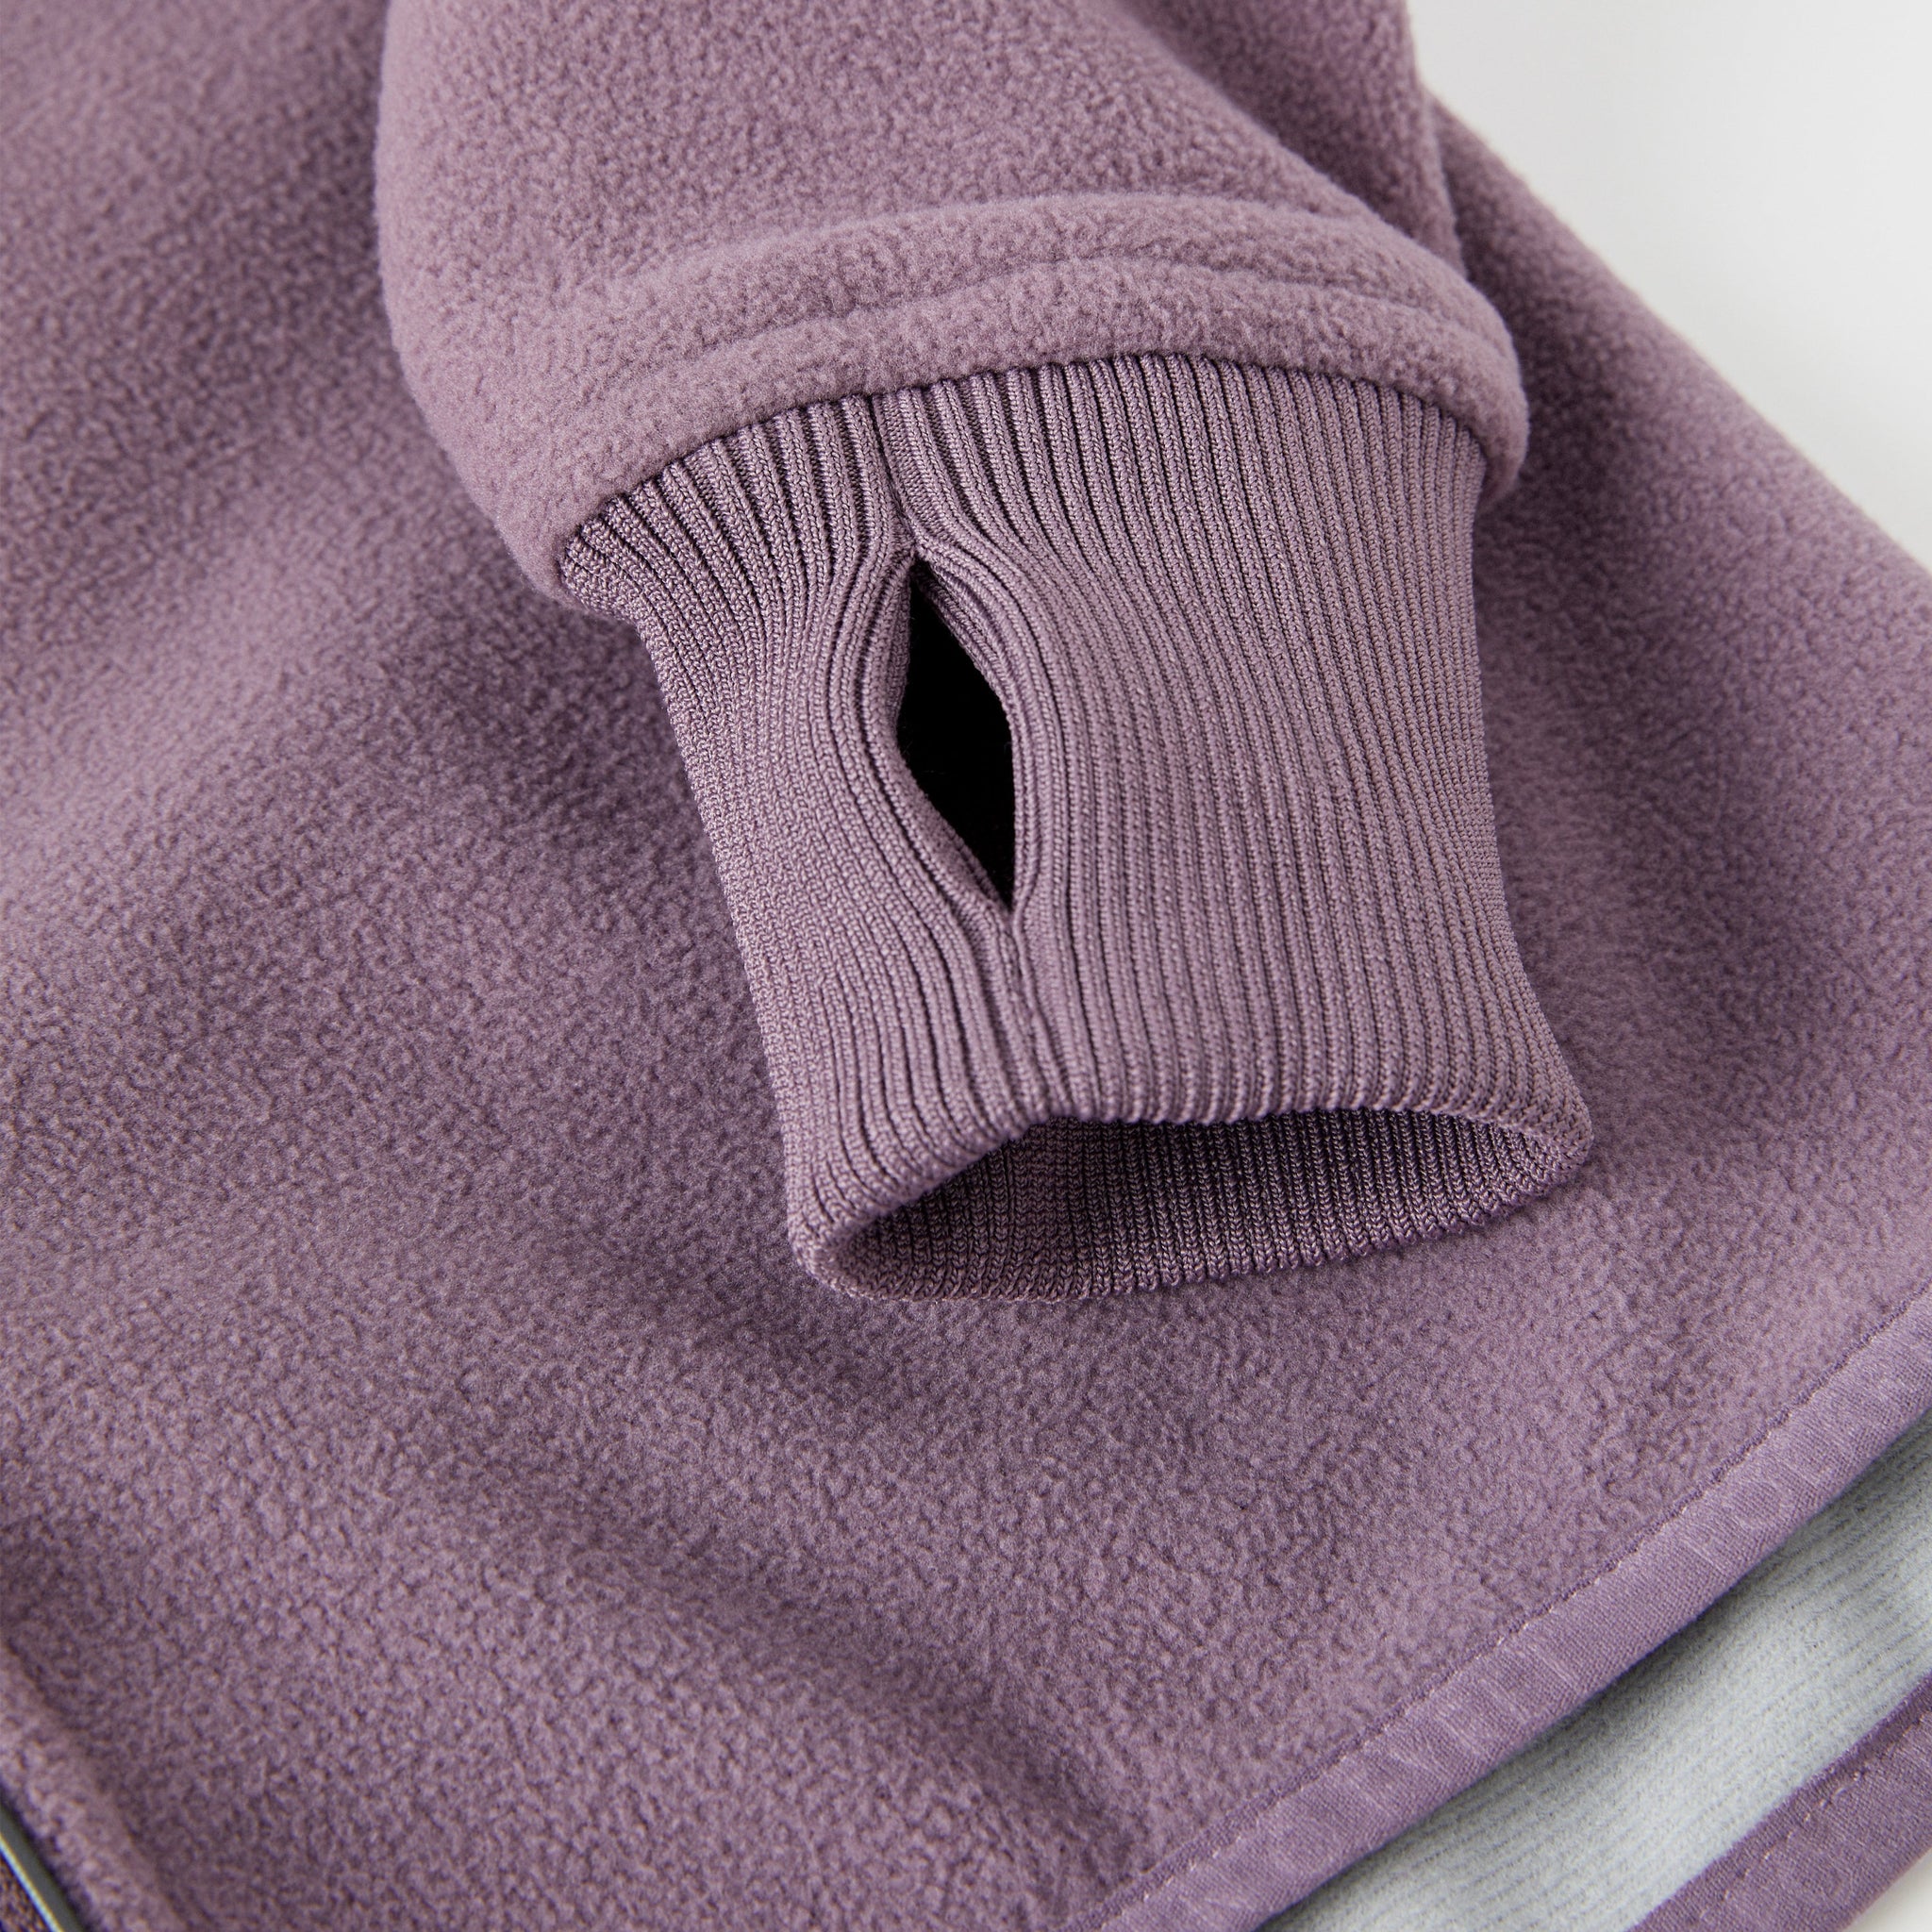 Waterproof Purple Kids Fleece Jacket from the Polarn O. Pyret kidswear collection. Ethically produced kids outerwear.